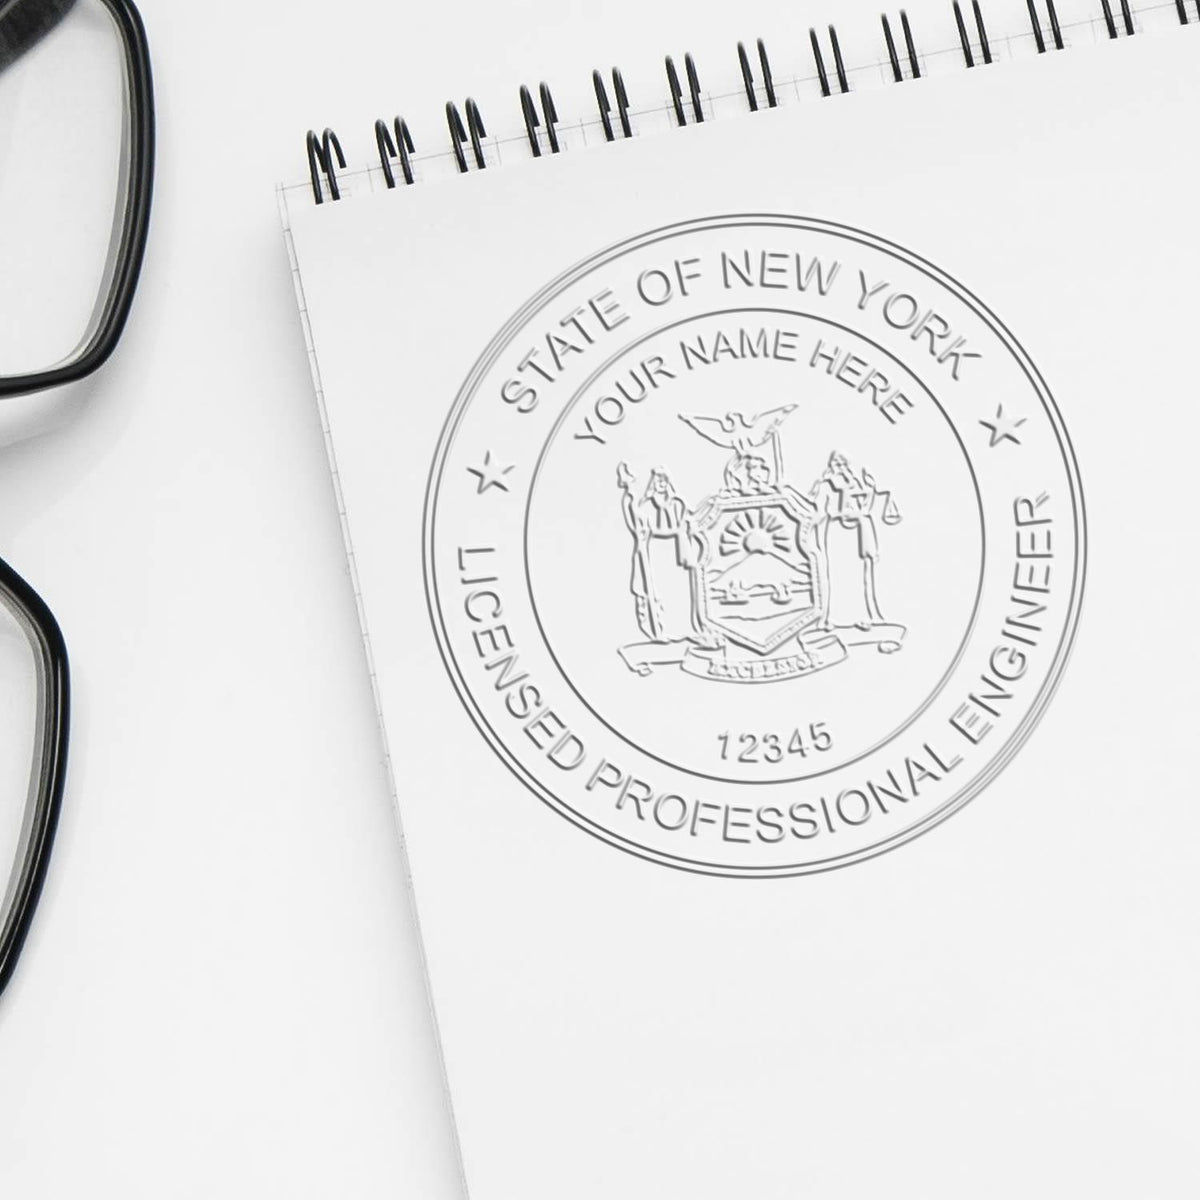 A stamped impression of the Soft New York Professional Engineer Seal in this stylish lifestyle photo, setting the tone for a unique and personalized product.